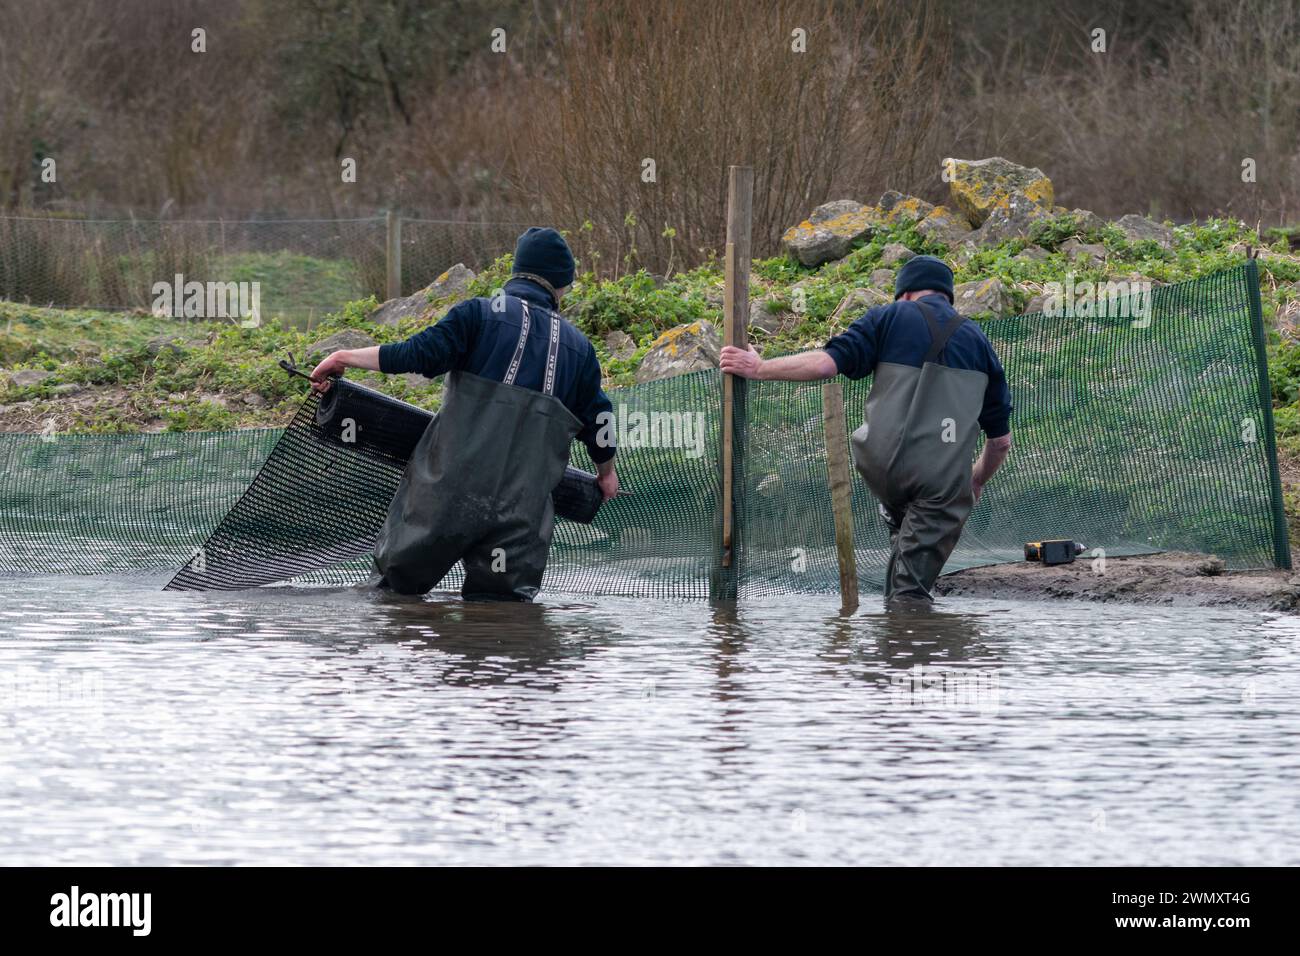 WWT staff working in water wearing waders at Slimbridge Wetland Centre constructing a temporary corral in a pond, England, UK Stock Photo